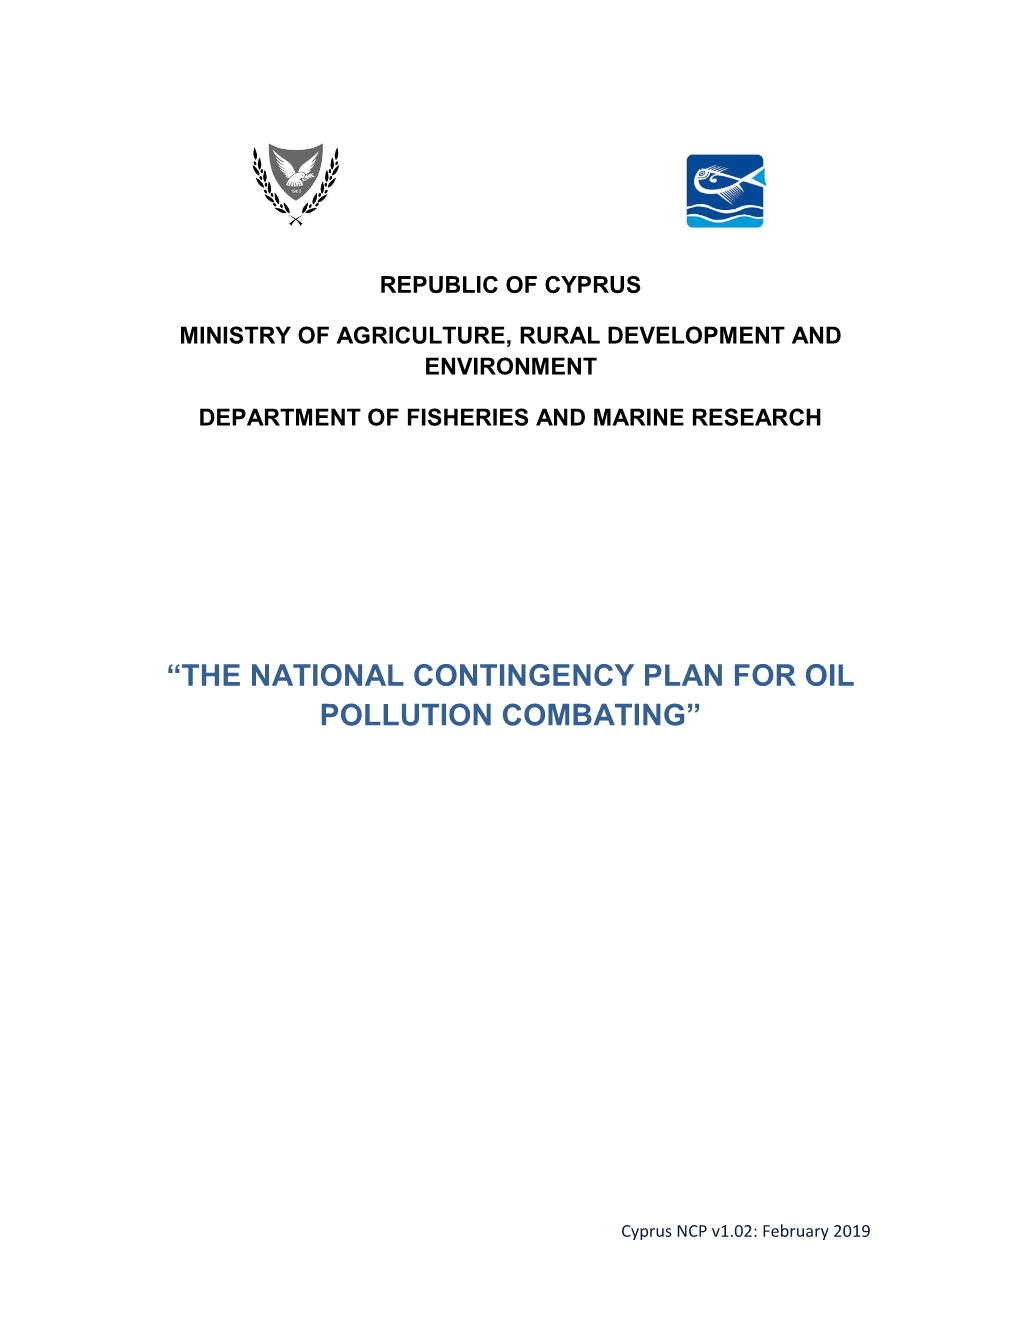 “The National Contingency Plan for Oil Pollution Combating”